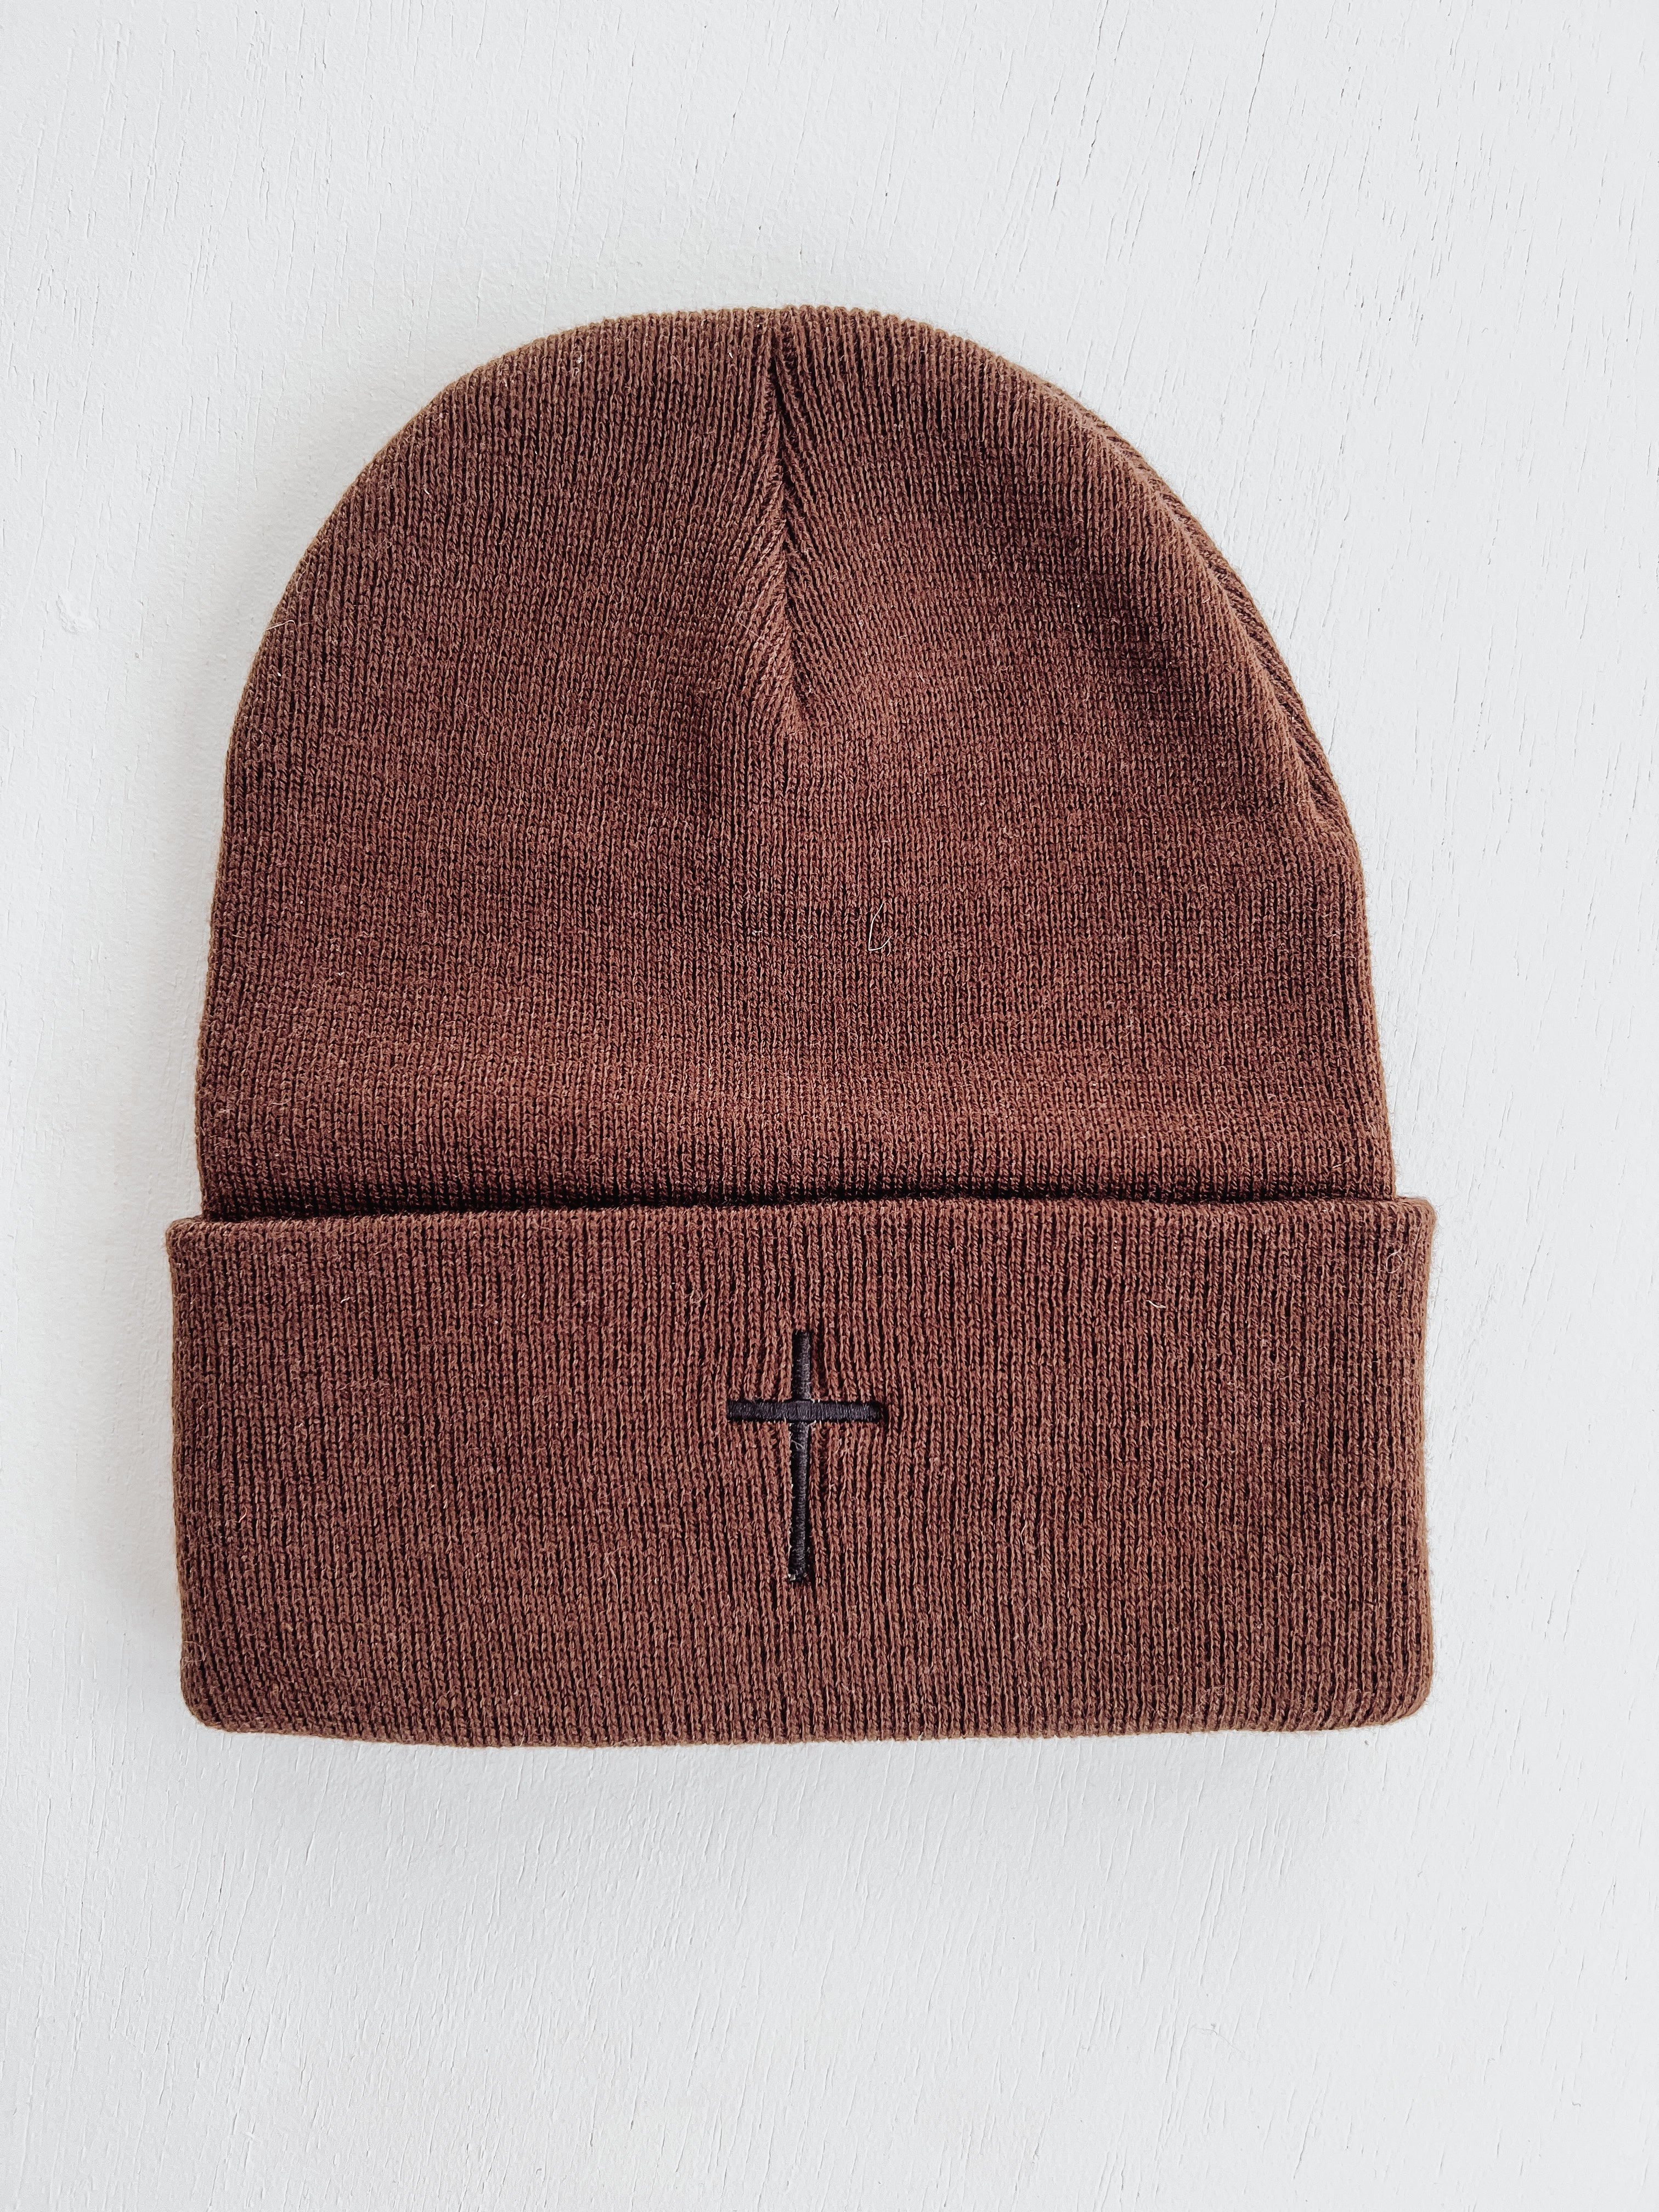 Embroidered Cross Knit Beanie - Brown